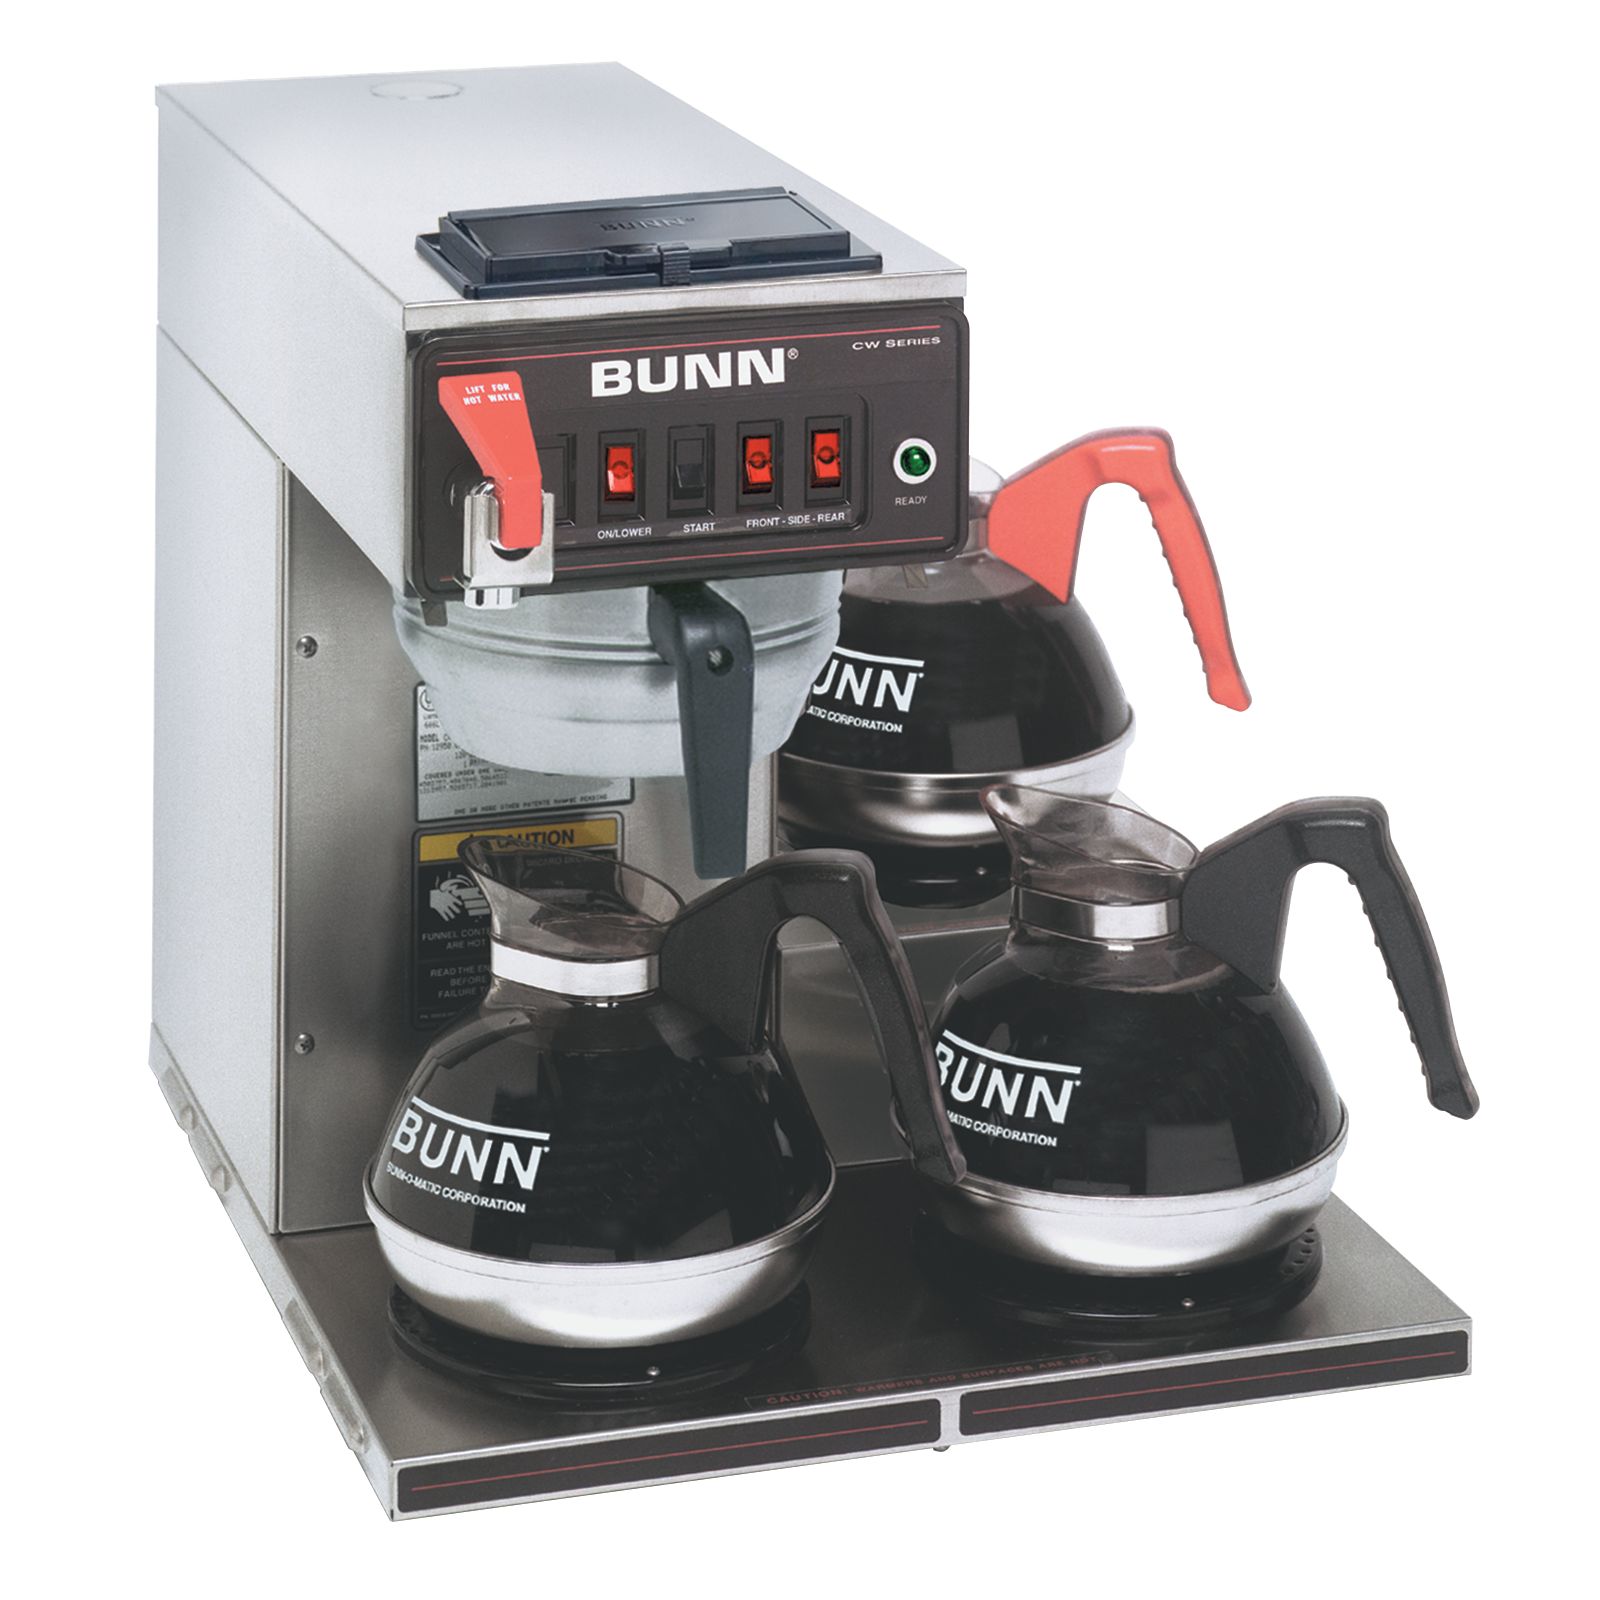 Bunn 12950.0217 CWTF15-3 Automatic 12 Cup Coffee Brewer with 2 Upper  Warmers, 1 Lower Warmer, and Stainless Steel Funnel - 120V